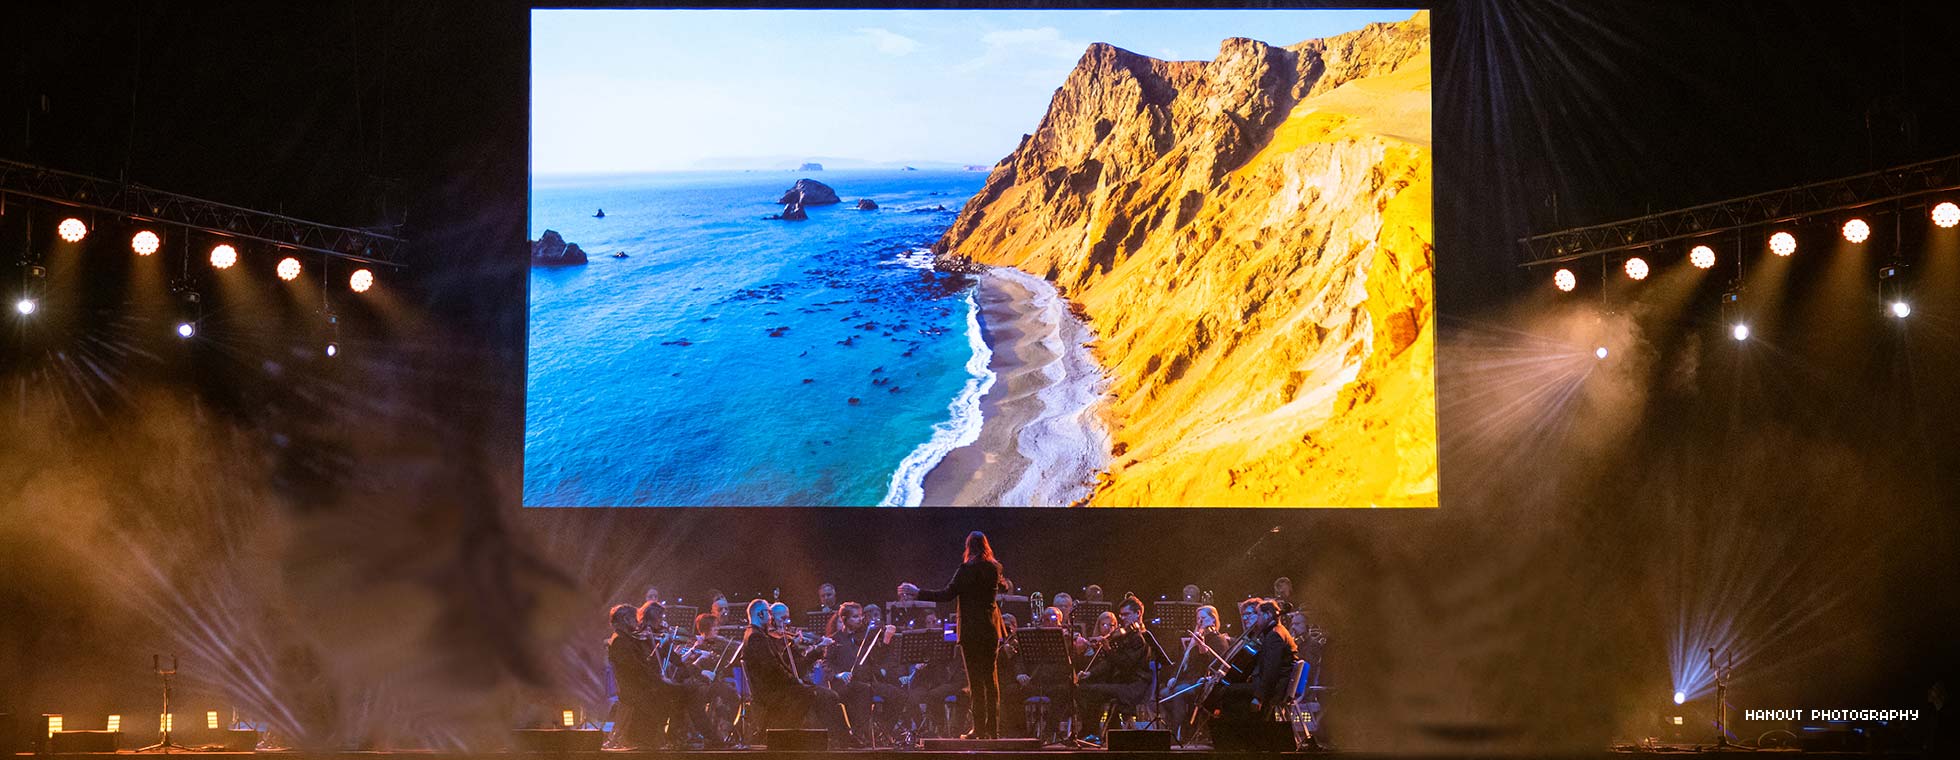 A man with outstretched arms conducts an orchestra seated below a video depicting a bird’s eye view of waves gently rolling into the side of a majestic cliff. 